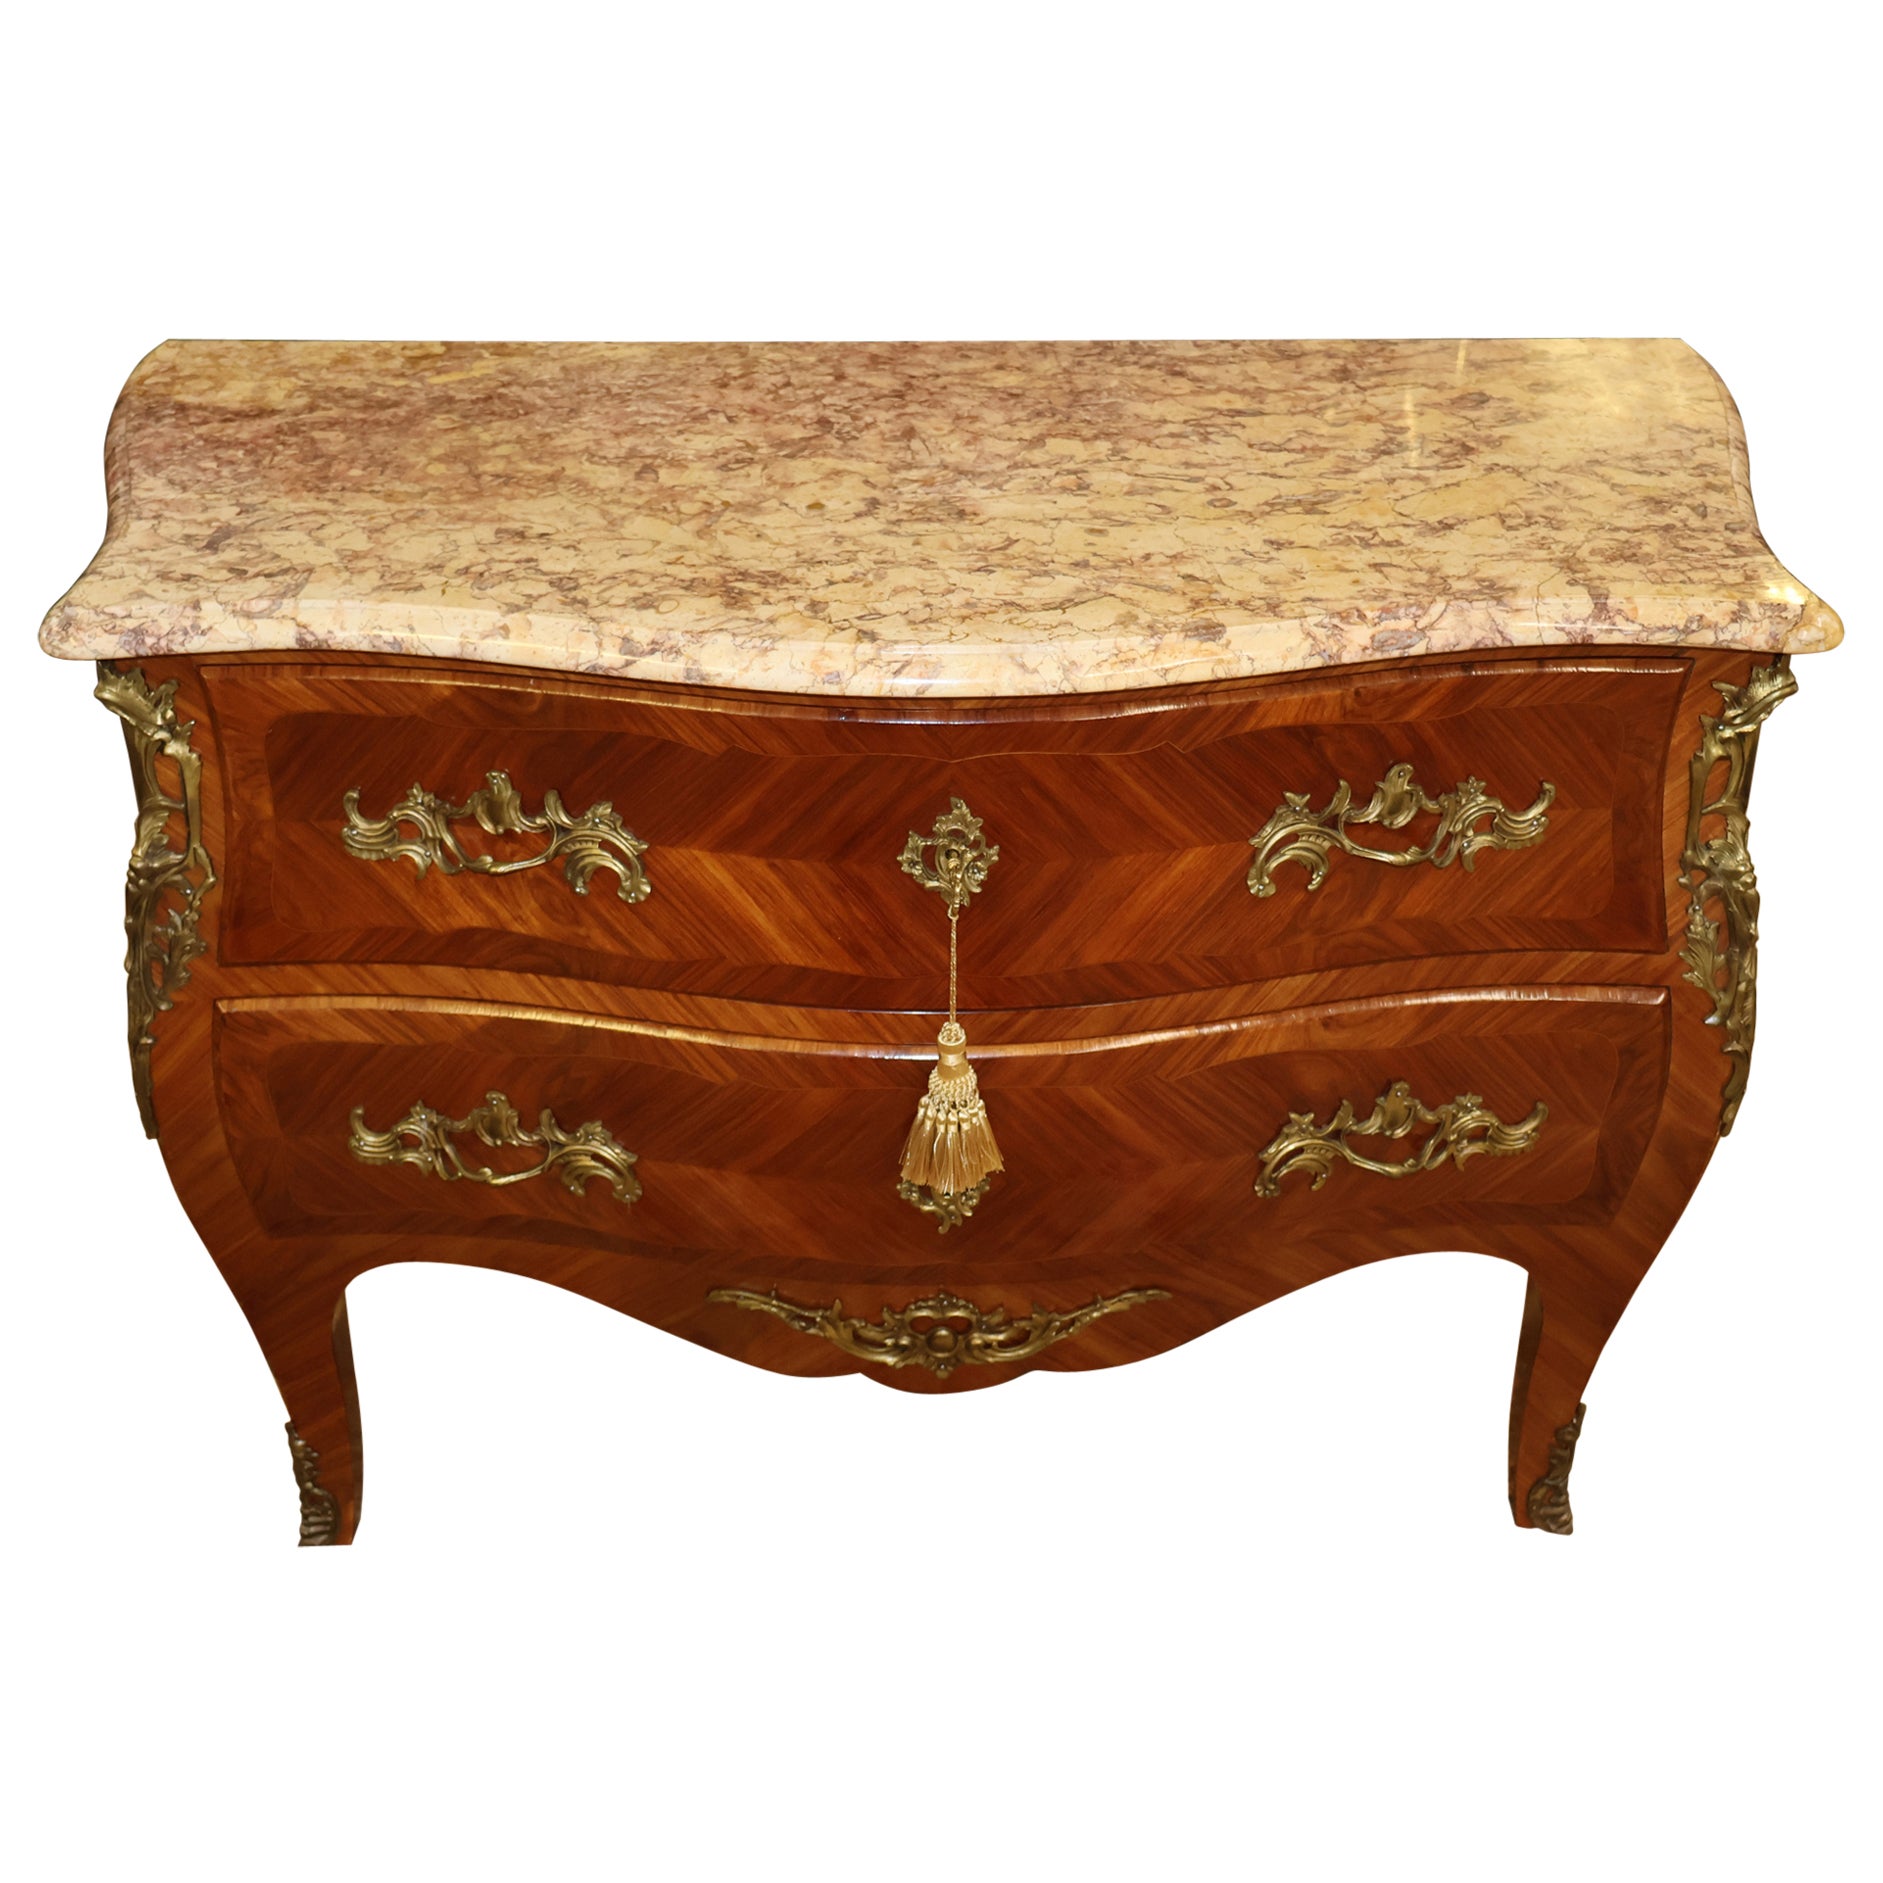 French Louis XV Style Kingwood Marble Top Commode Dresser Chest of Drawers For Sale